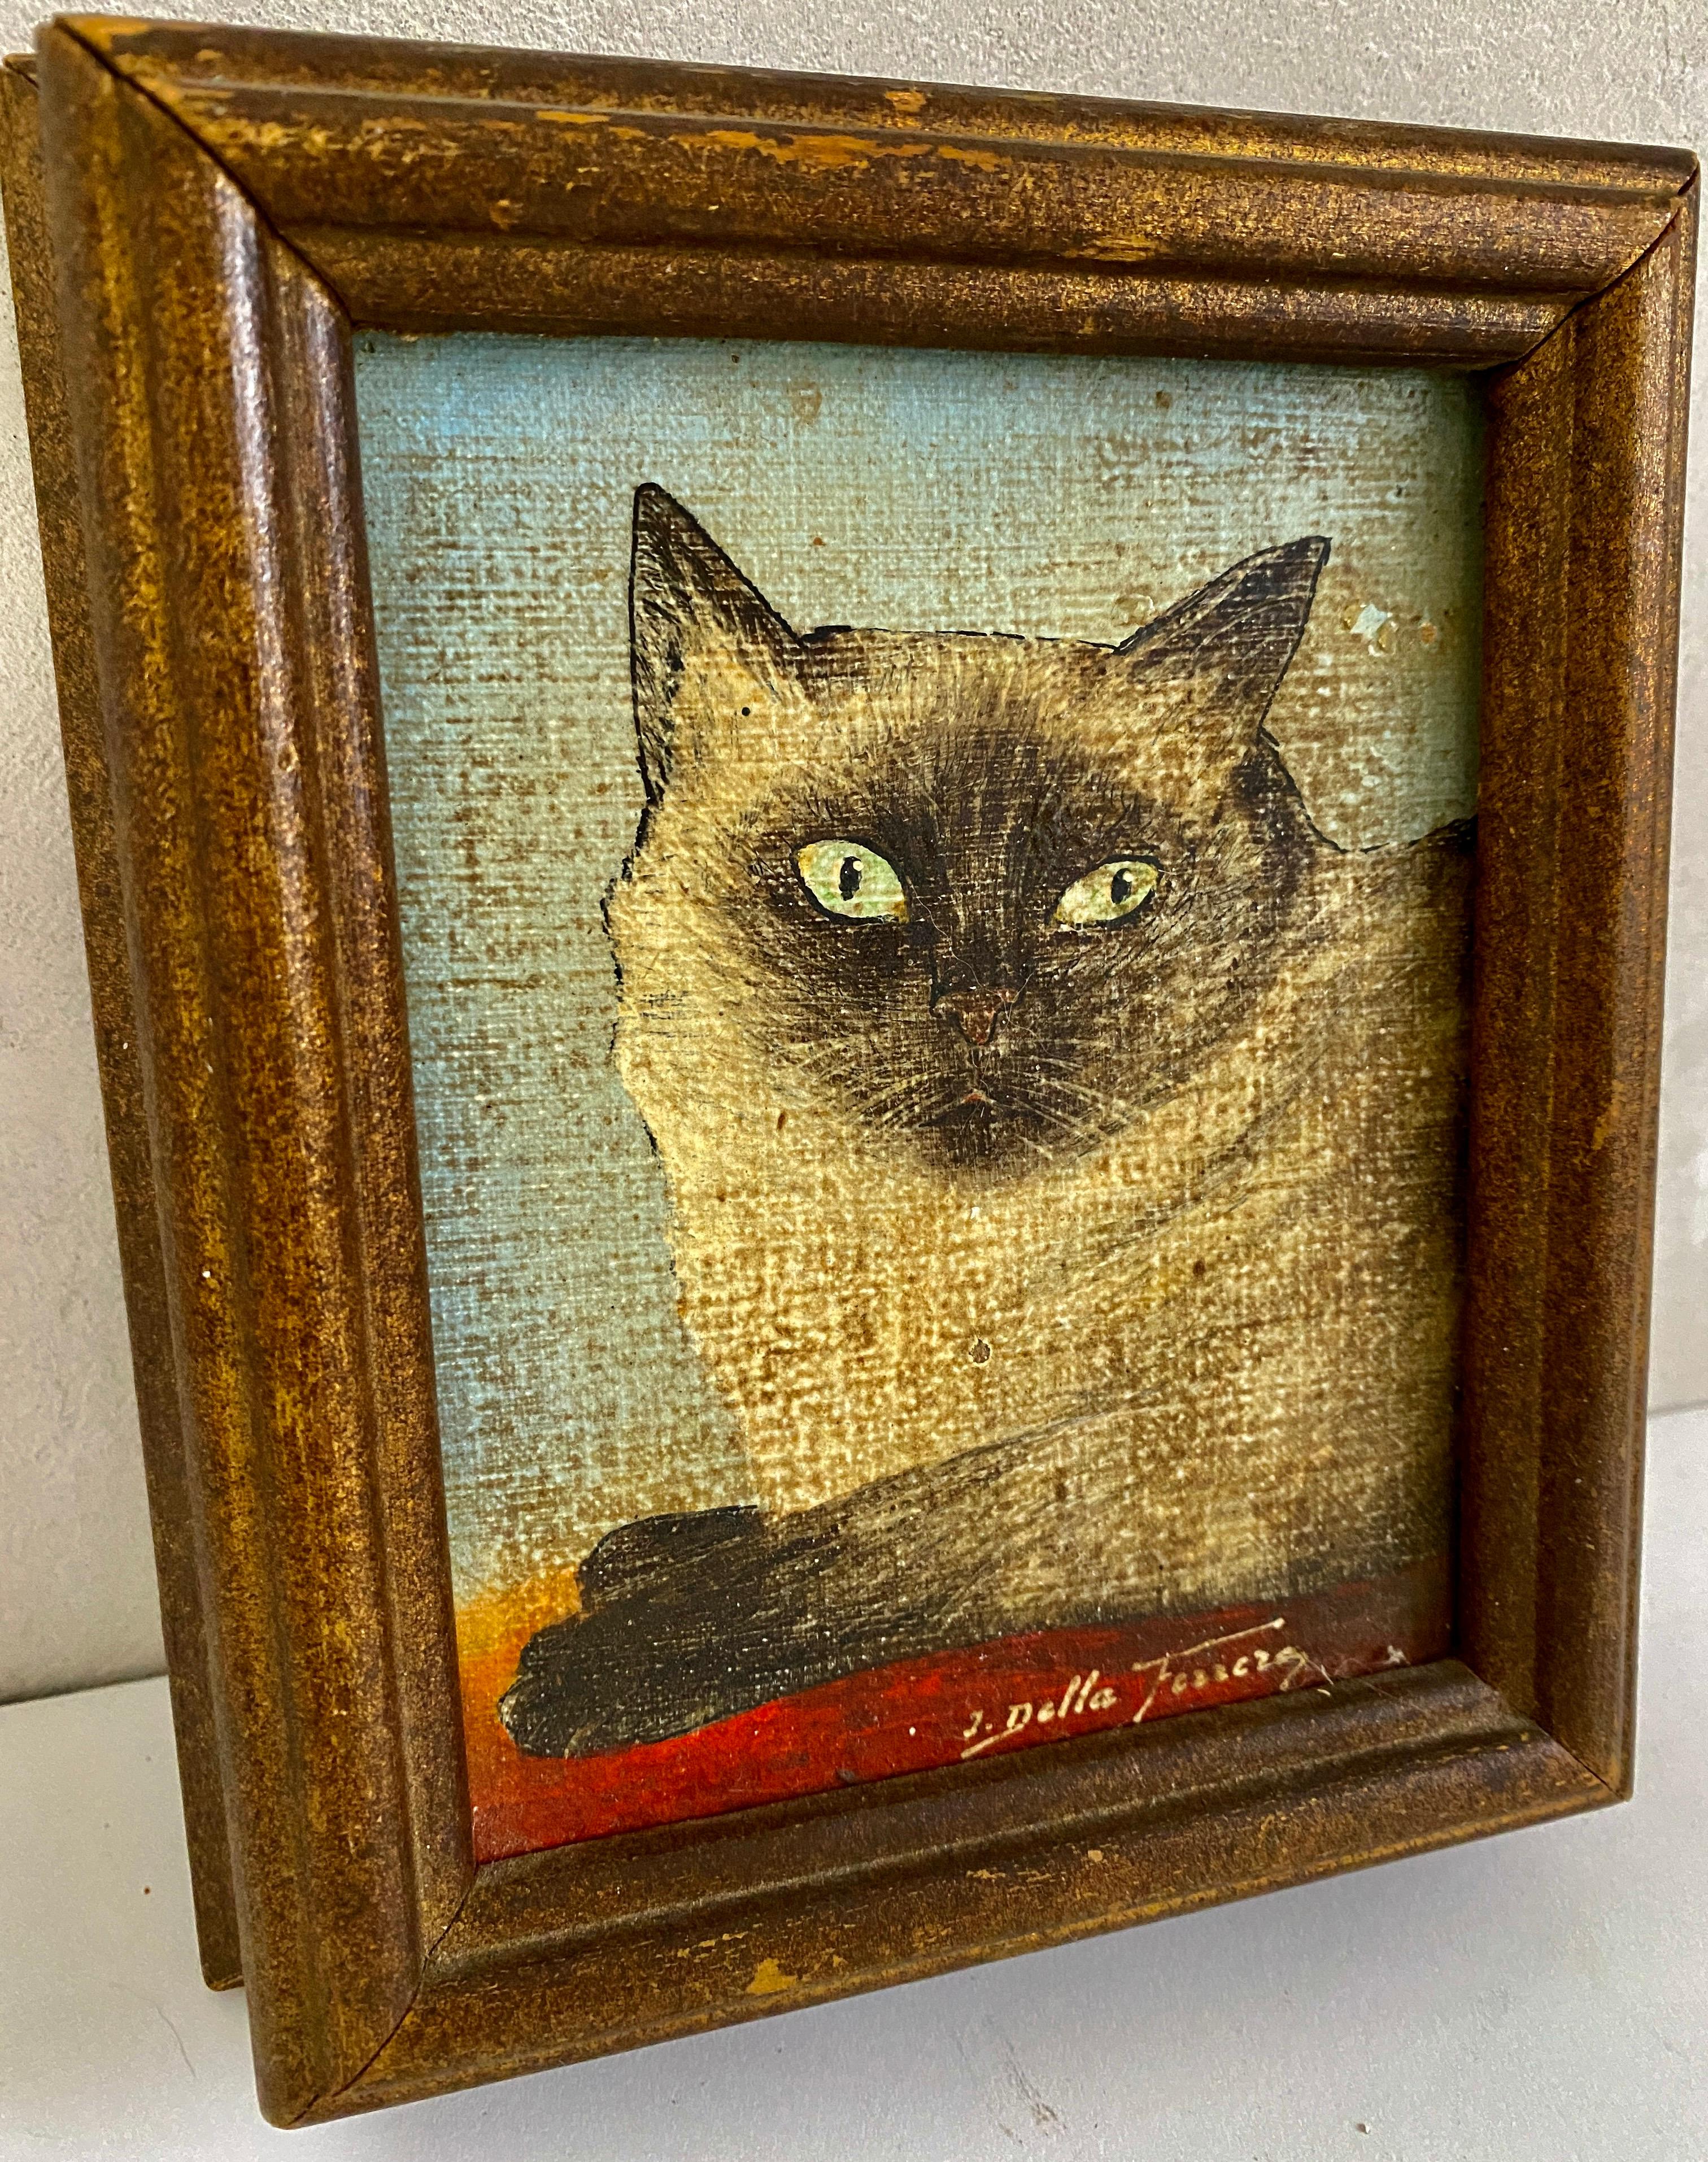 Hand-Painted Miniature Oil on Board Painting of Siamese Cat